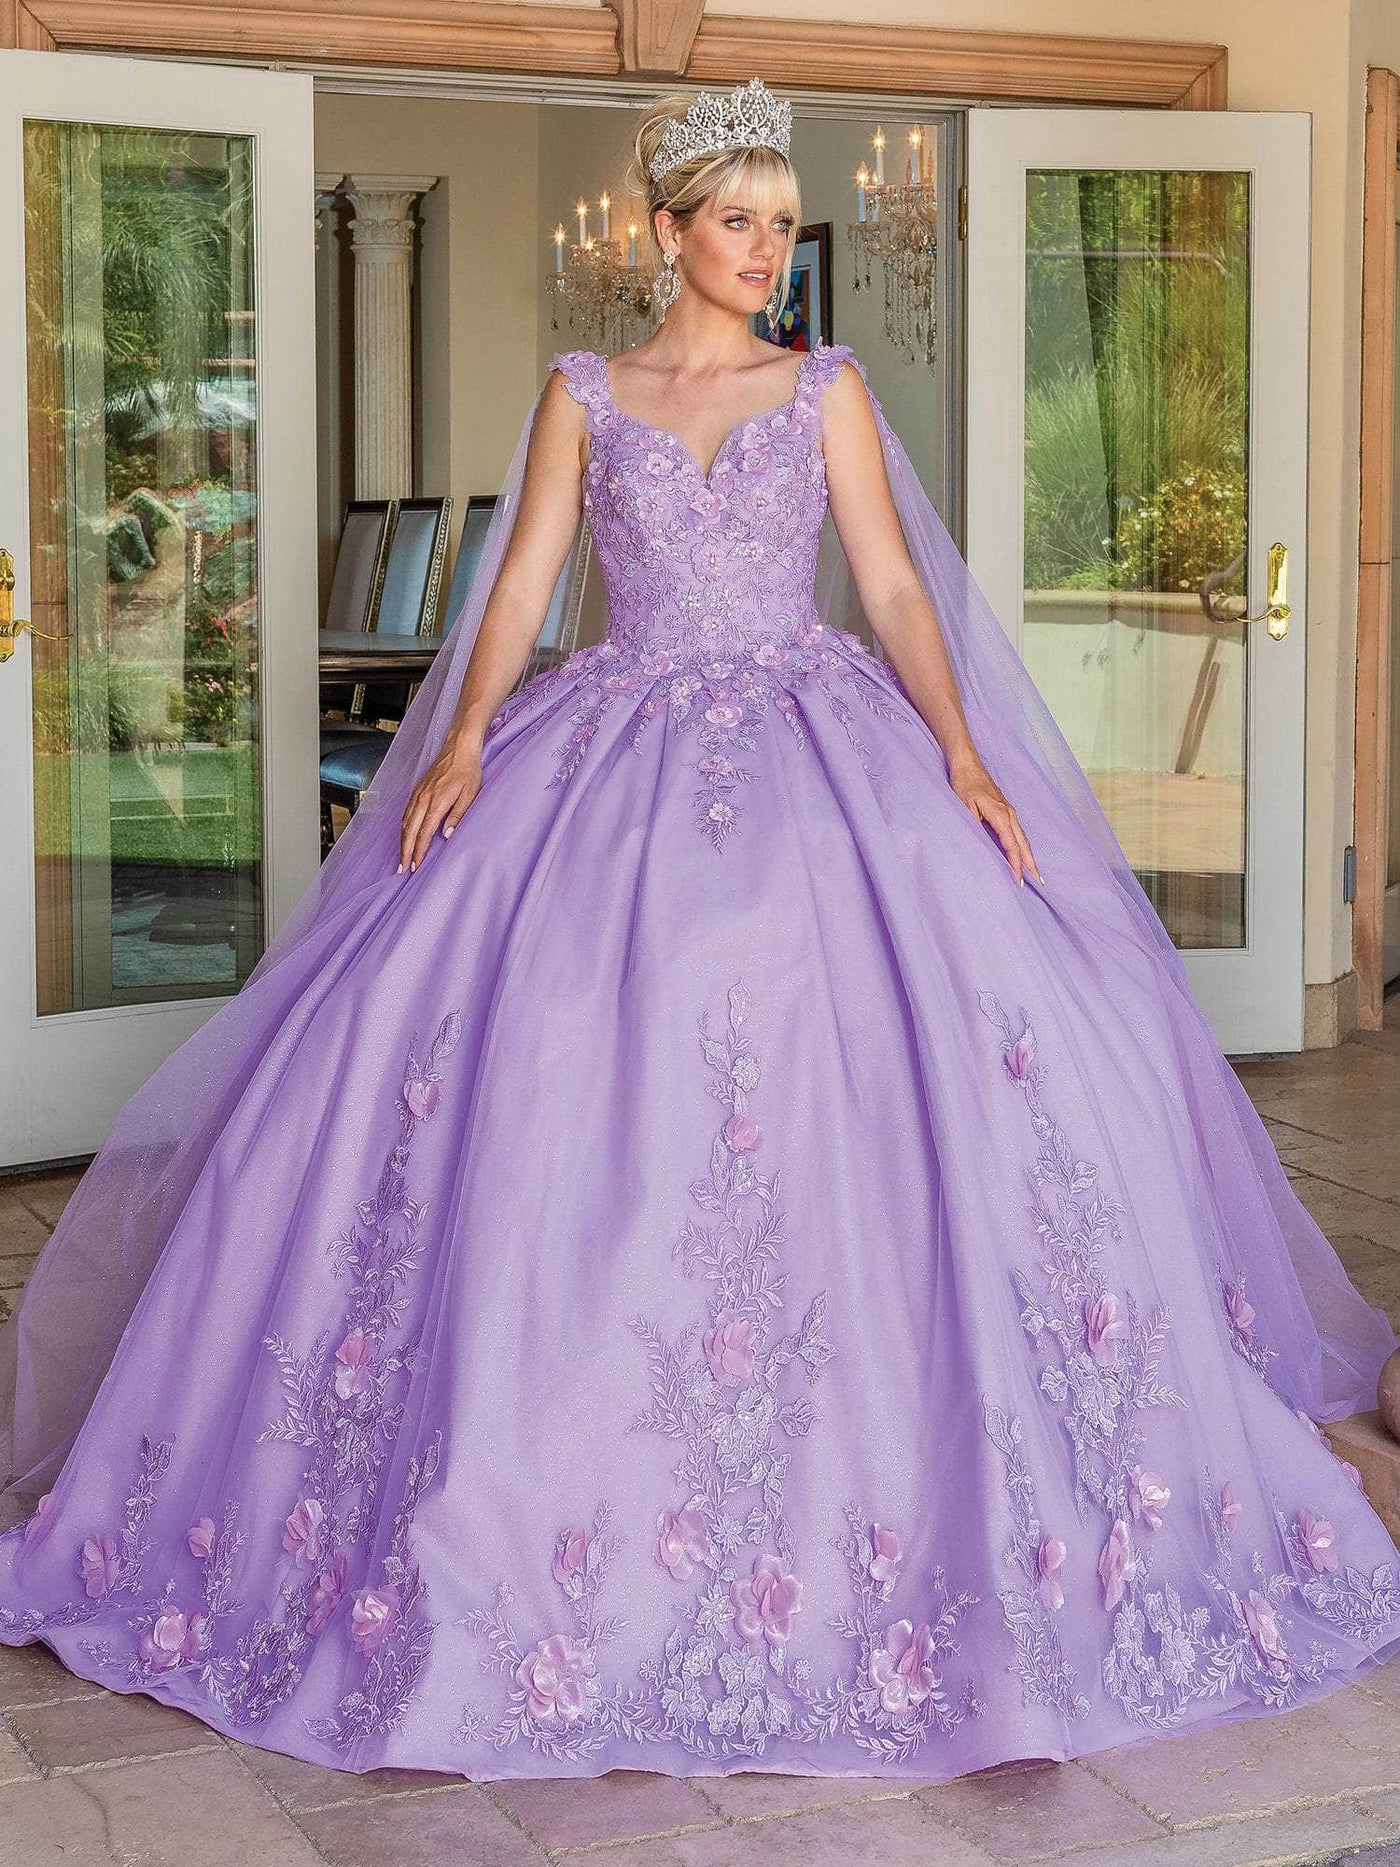 Dancing Queen 1716 - Lace Appliqued Sweetheart Ballgown Special Occasion Dress